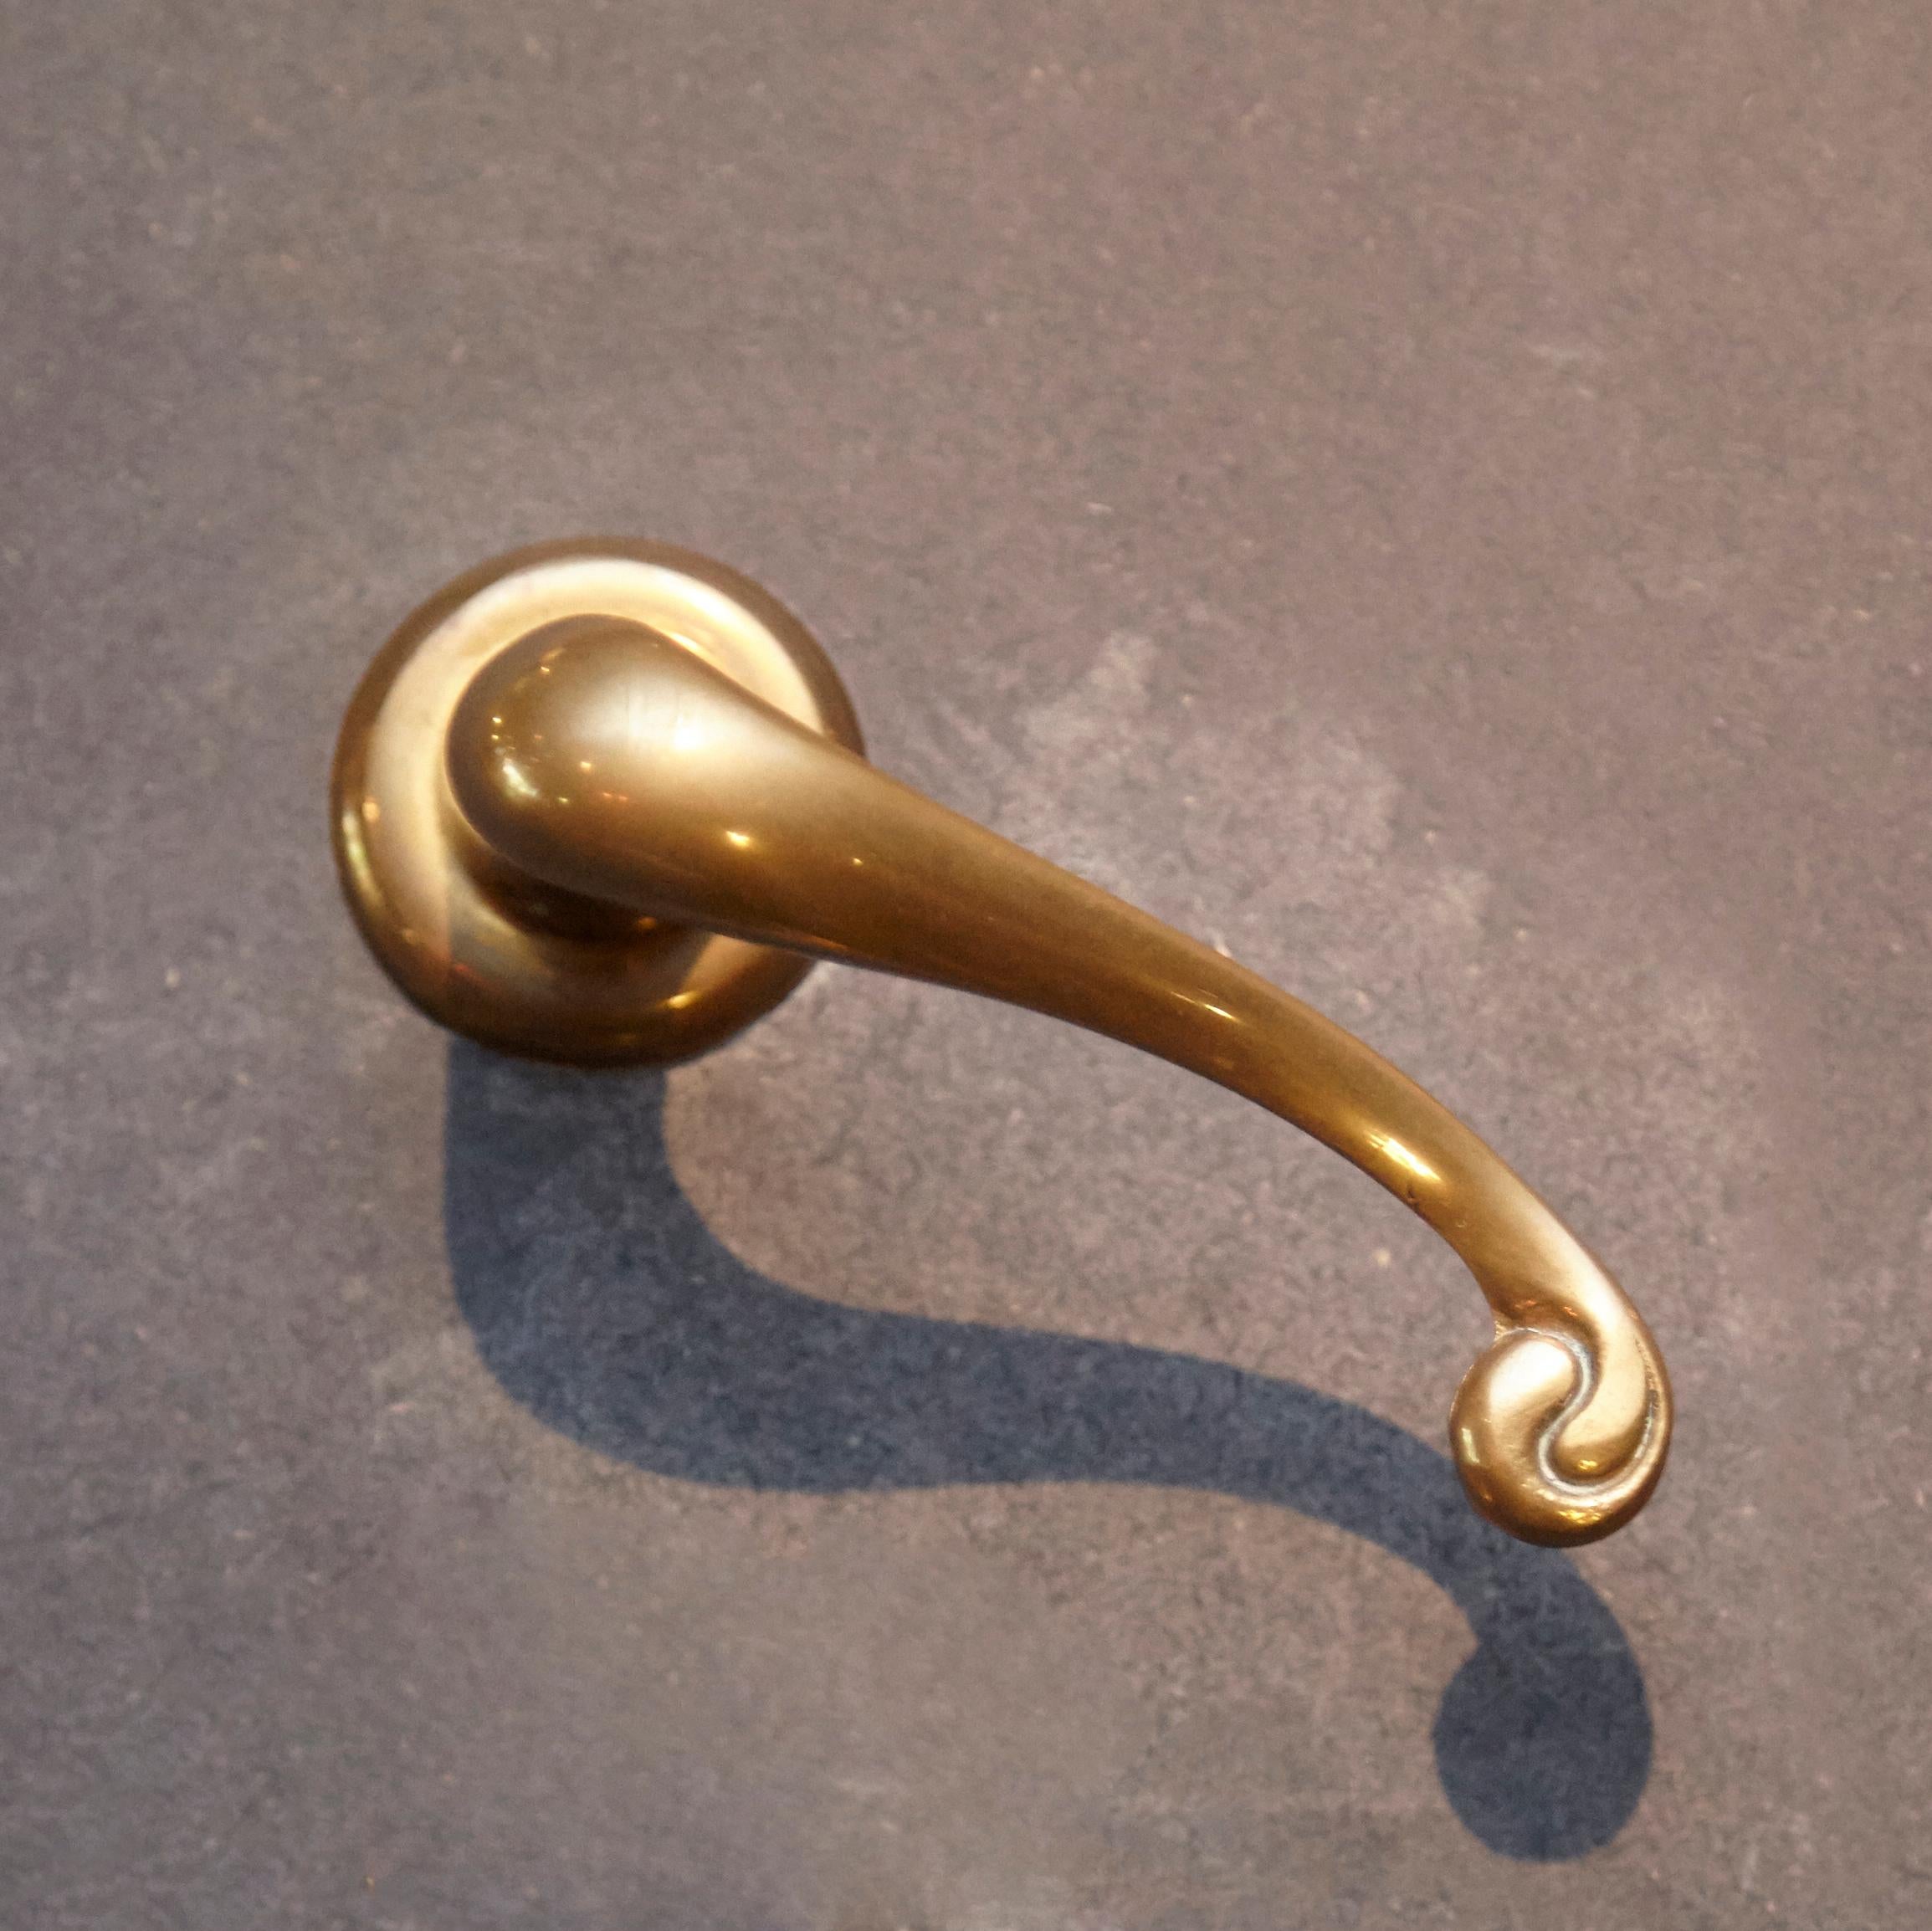 Calvet door handle set by Antoni Gaudí.

Solid cast brass with polished finish.

An exact reproduction in both form and material original metalwork fittings designed by Antoni Gaudí for various of his works of architecture. This unique series